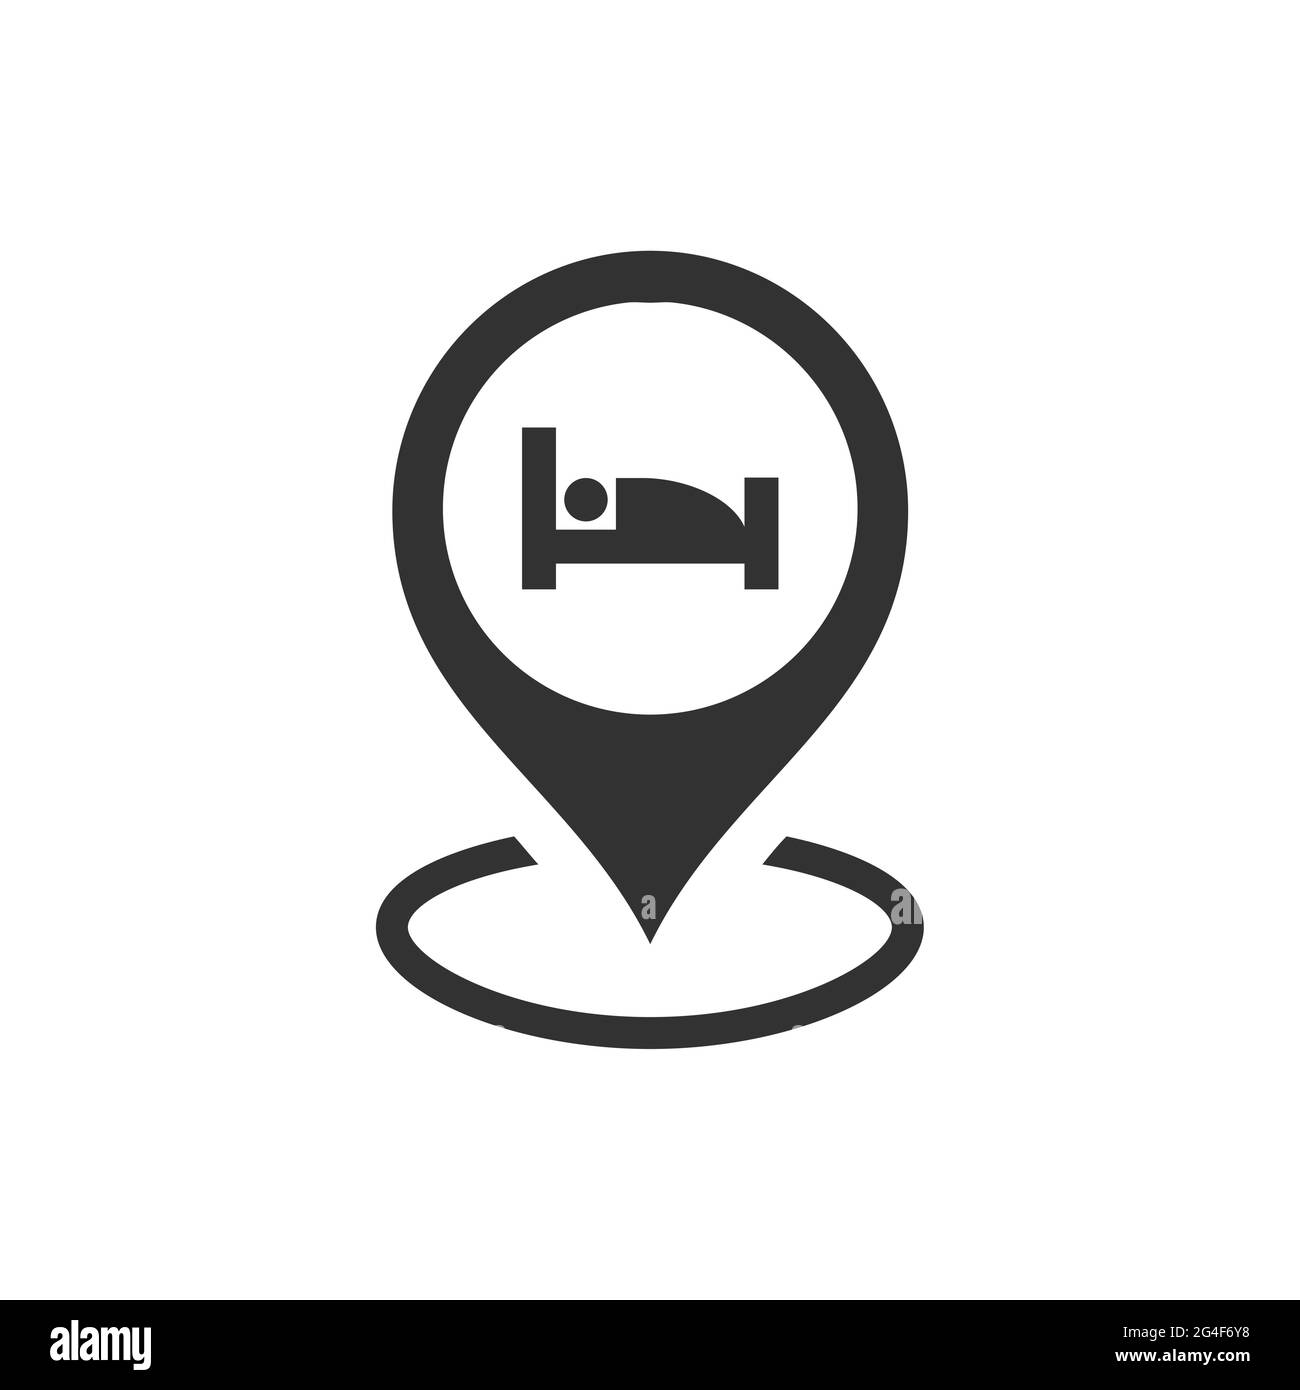 Hotel location pin for map with bed symbol. Black vector icon. Stock Vector